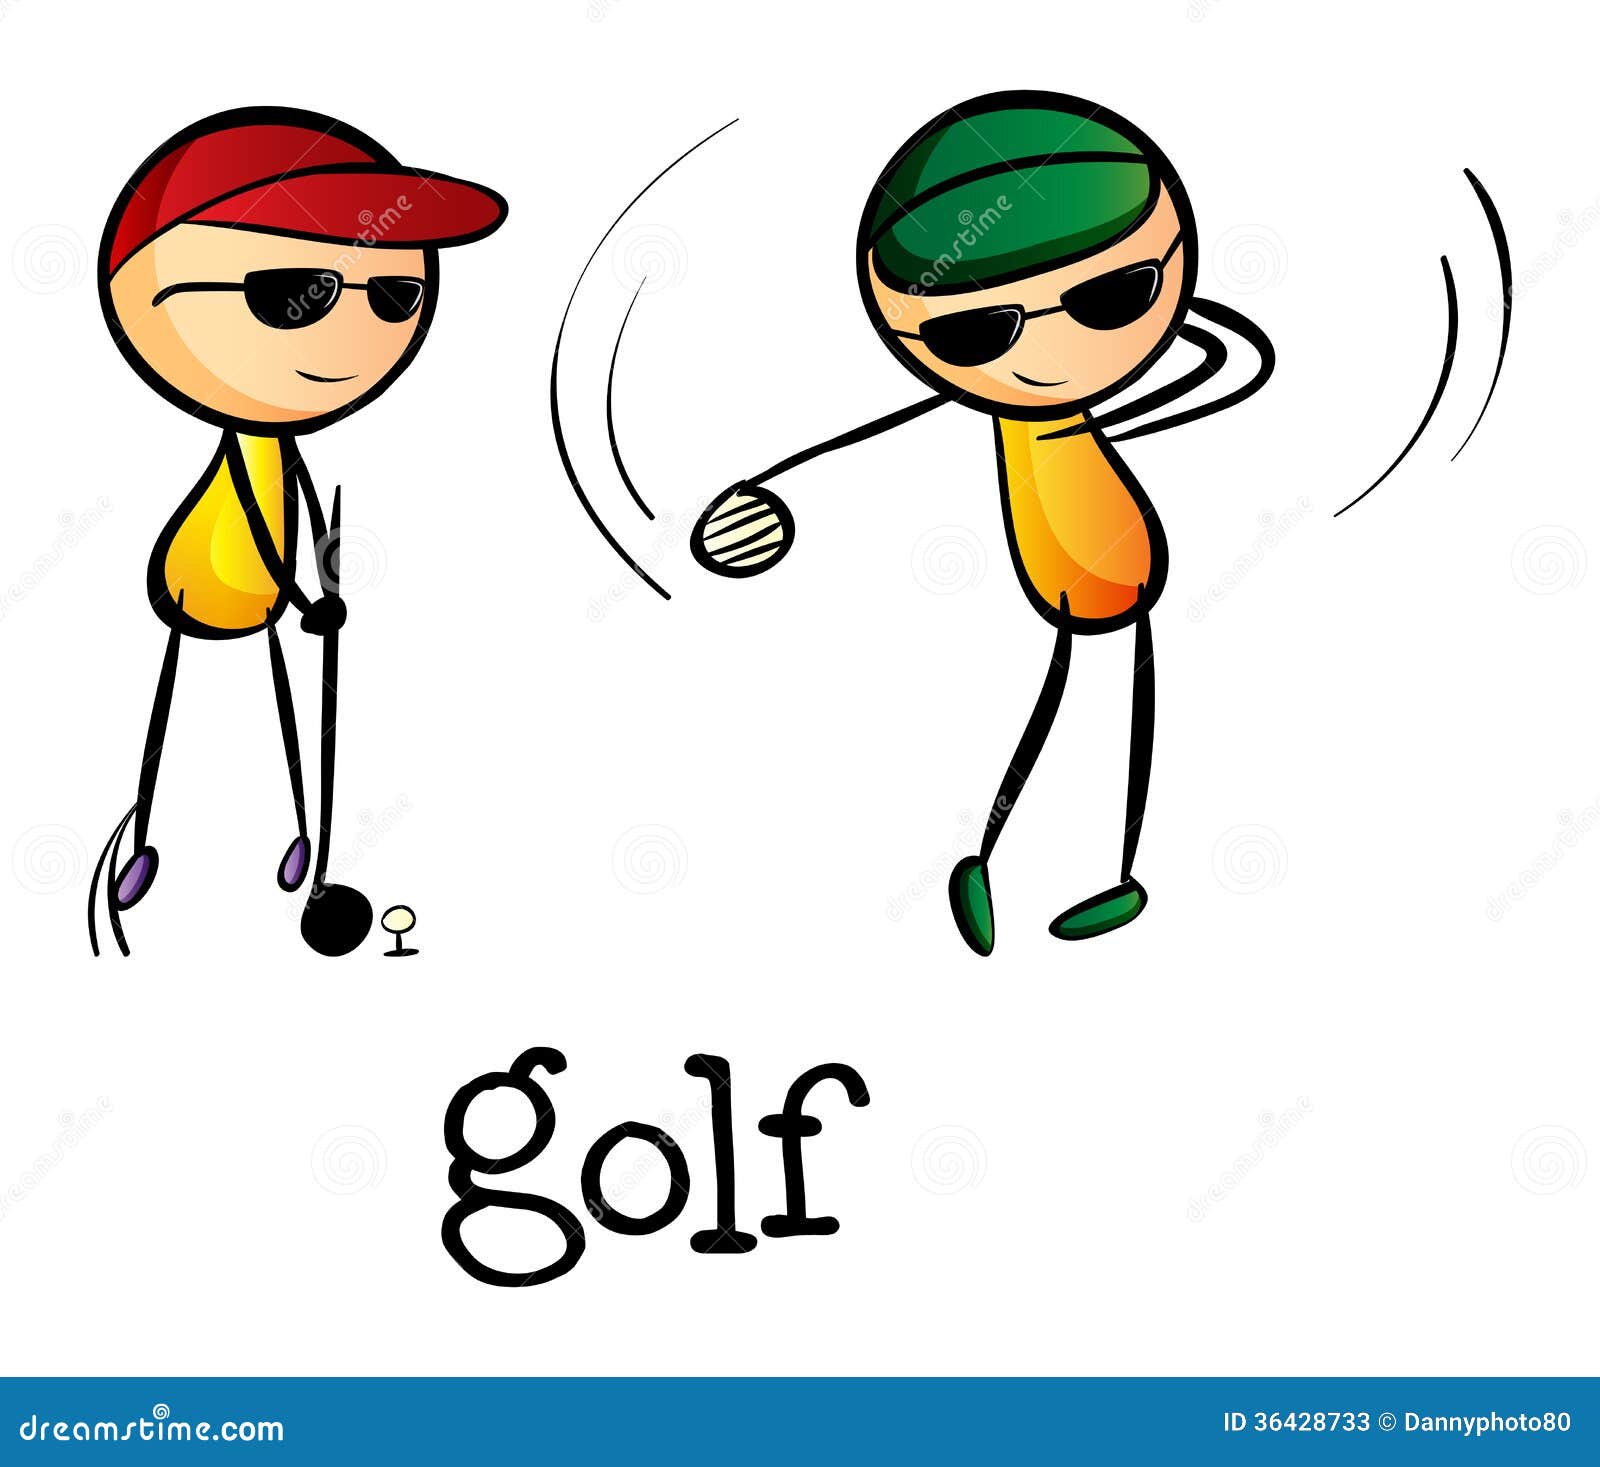 clipart man playing golf - photo #29